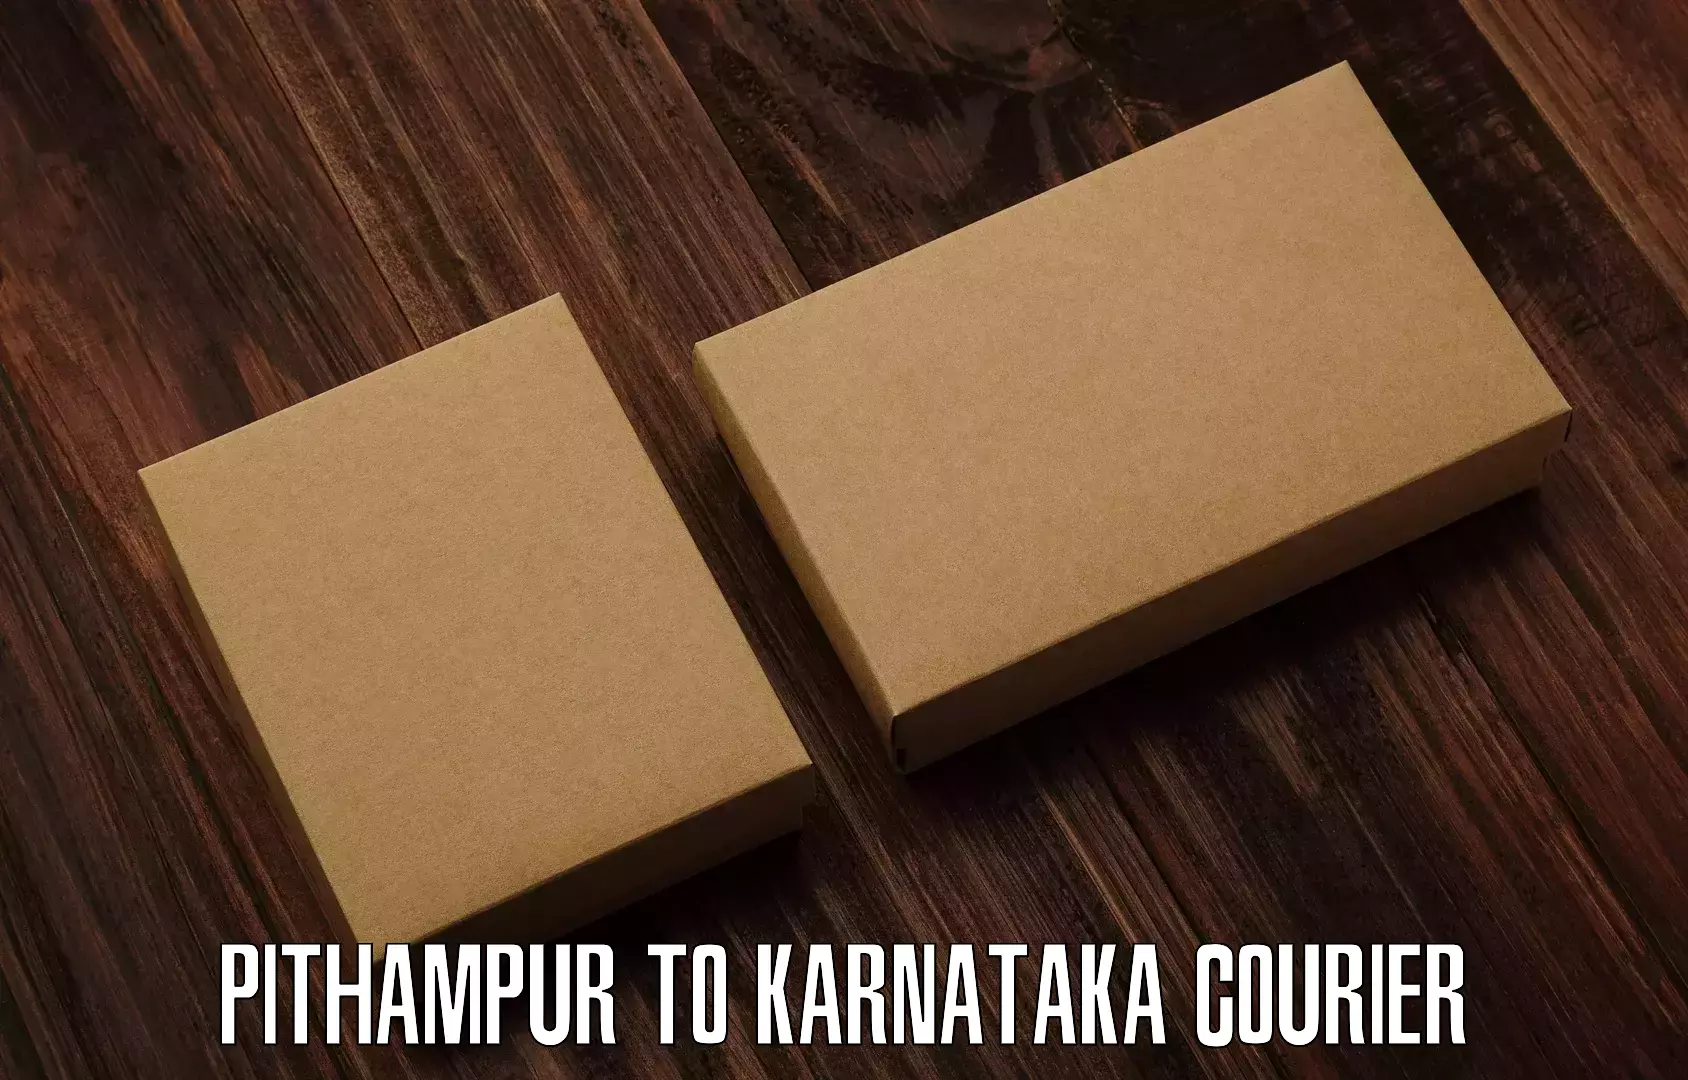 Courier service comparison Pithampur to Koratagere